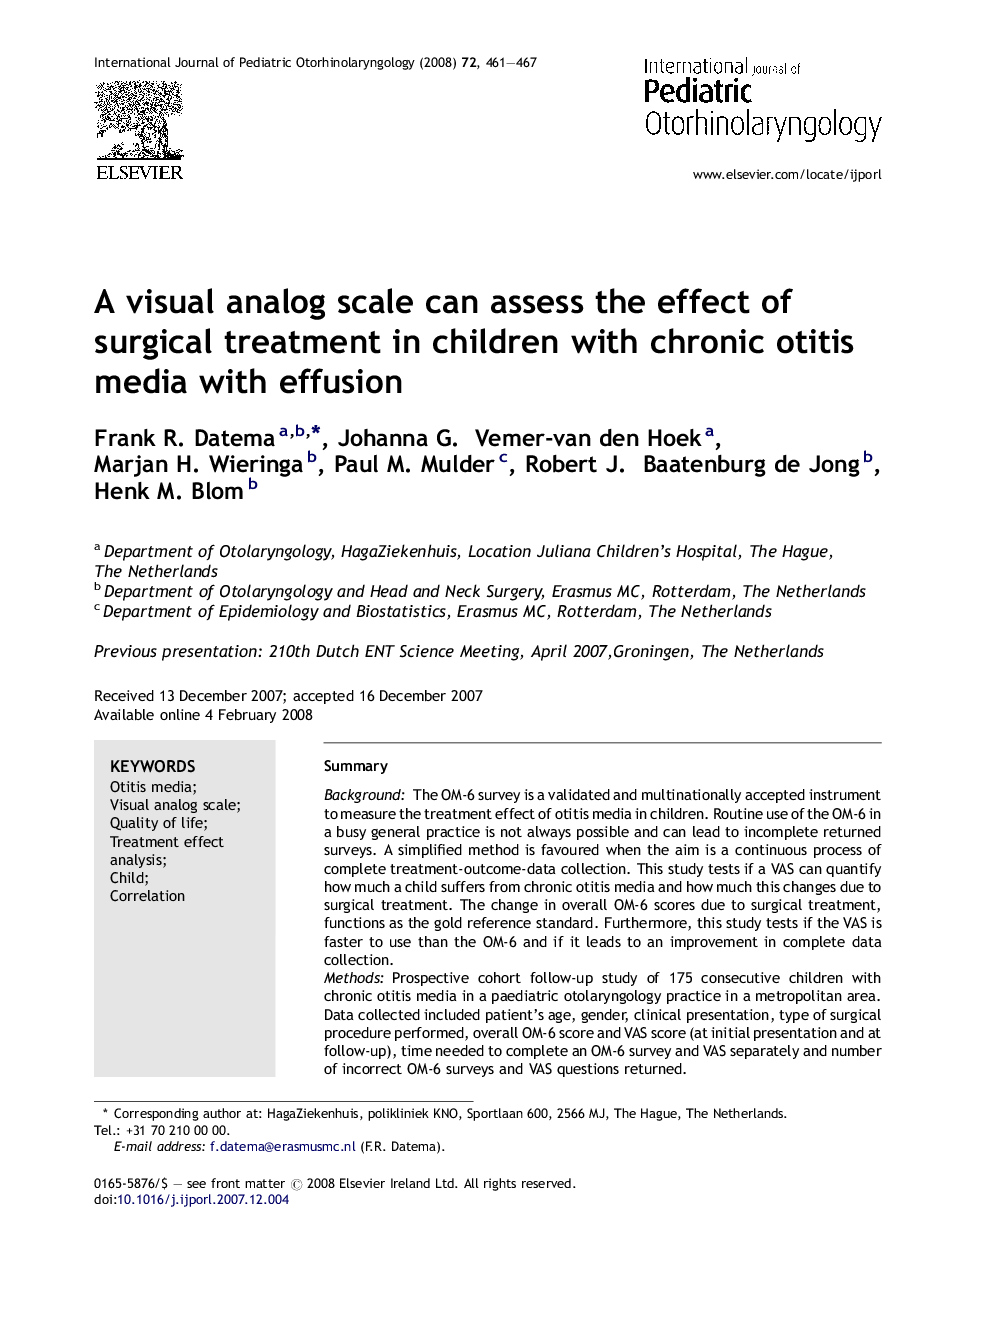 A visual analog scale can assess the effect of surgical treatment in children with chronic otitis media with effusion